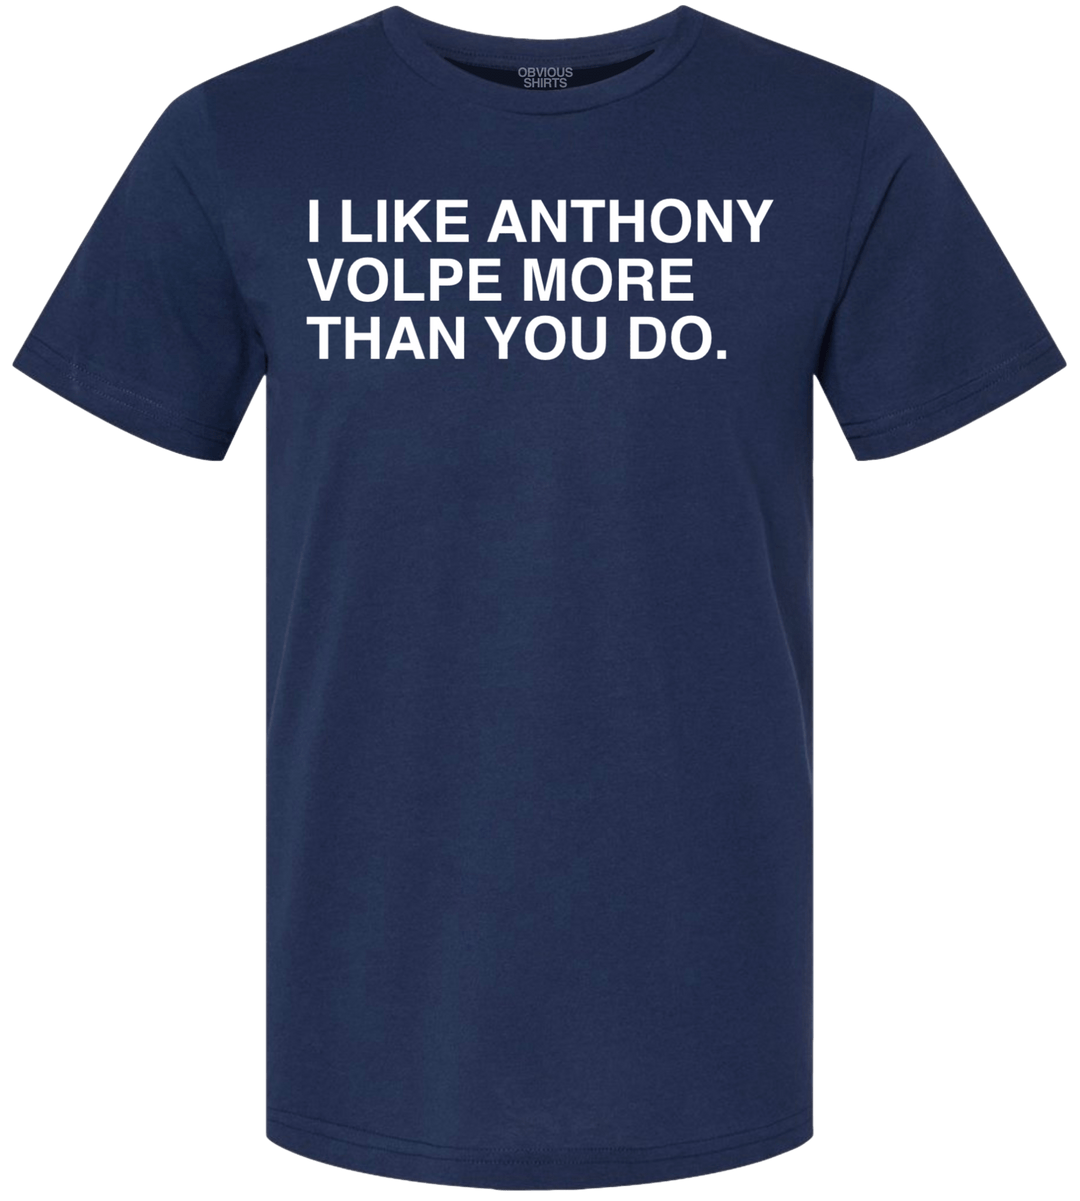 I LIKE ANTHONY VOLPE MORE THAN YOU DO. - OBVIOUS SHIRTS